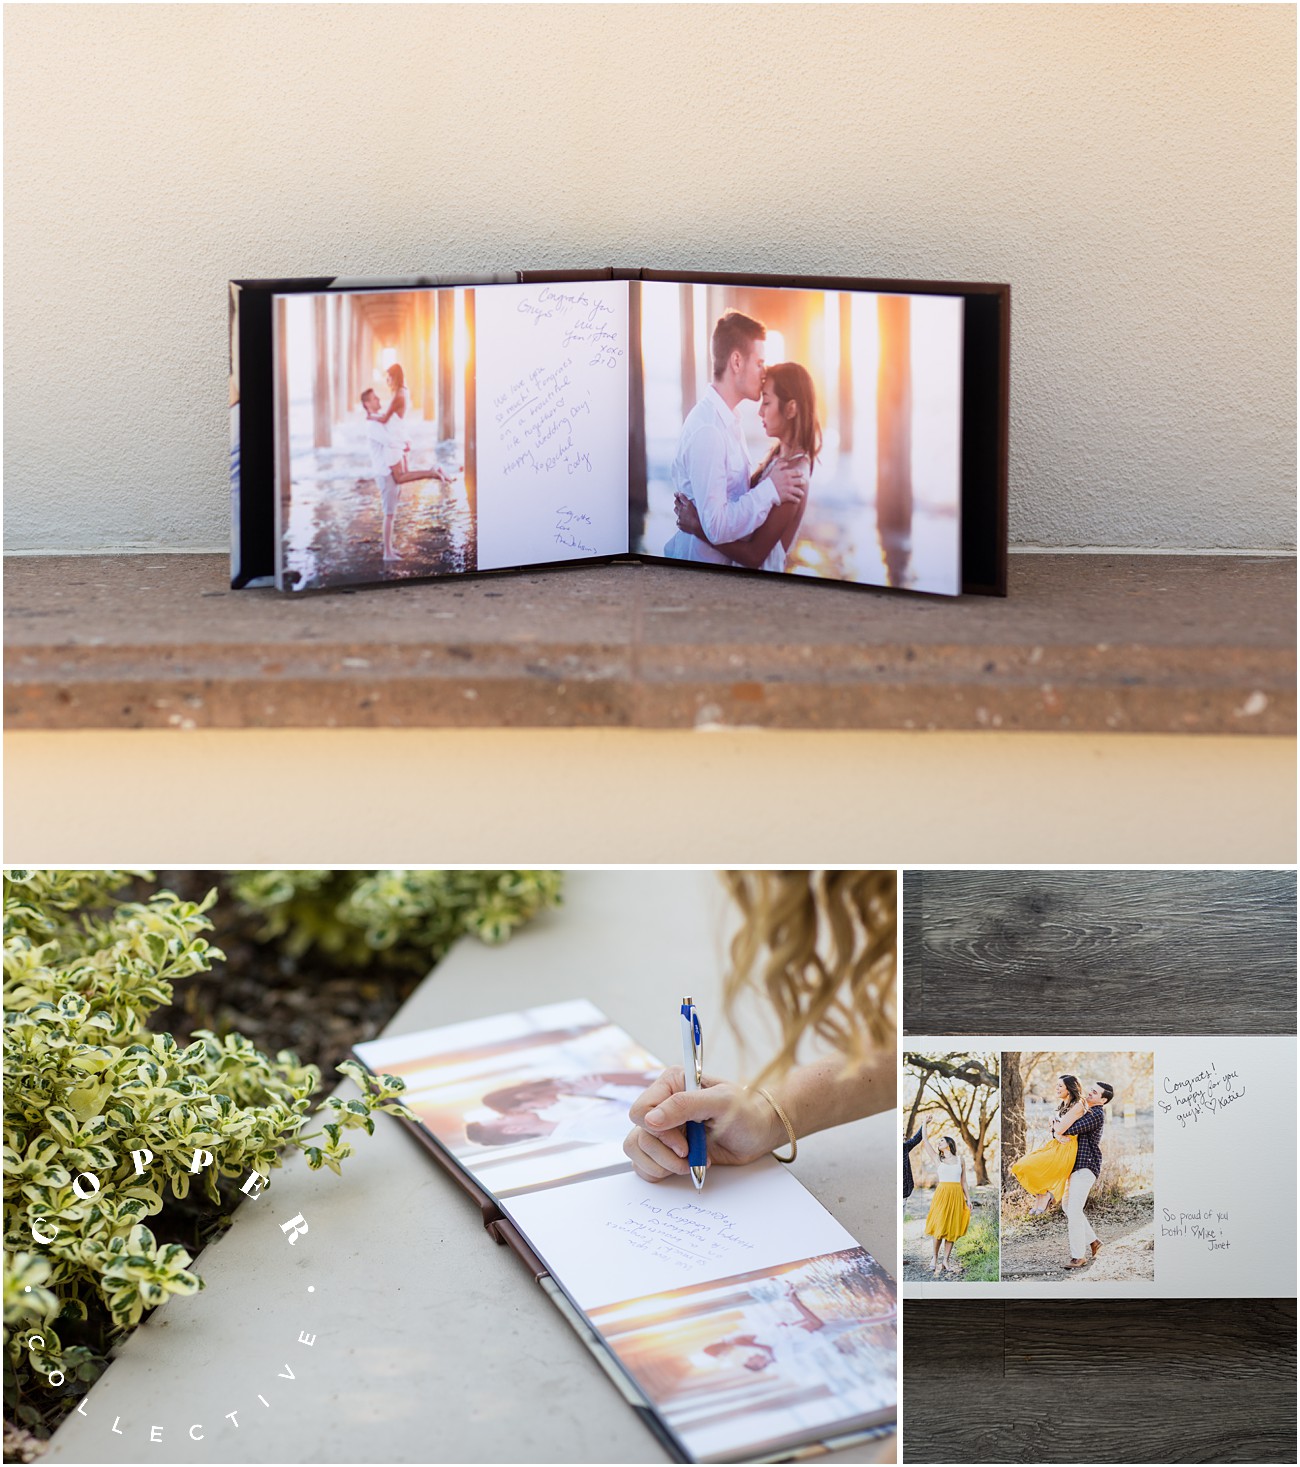 wedding albums as guest books for signing into your wedding for guests